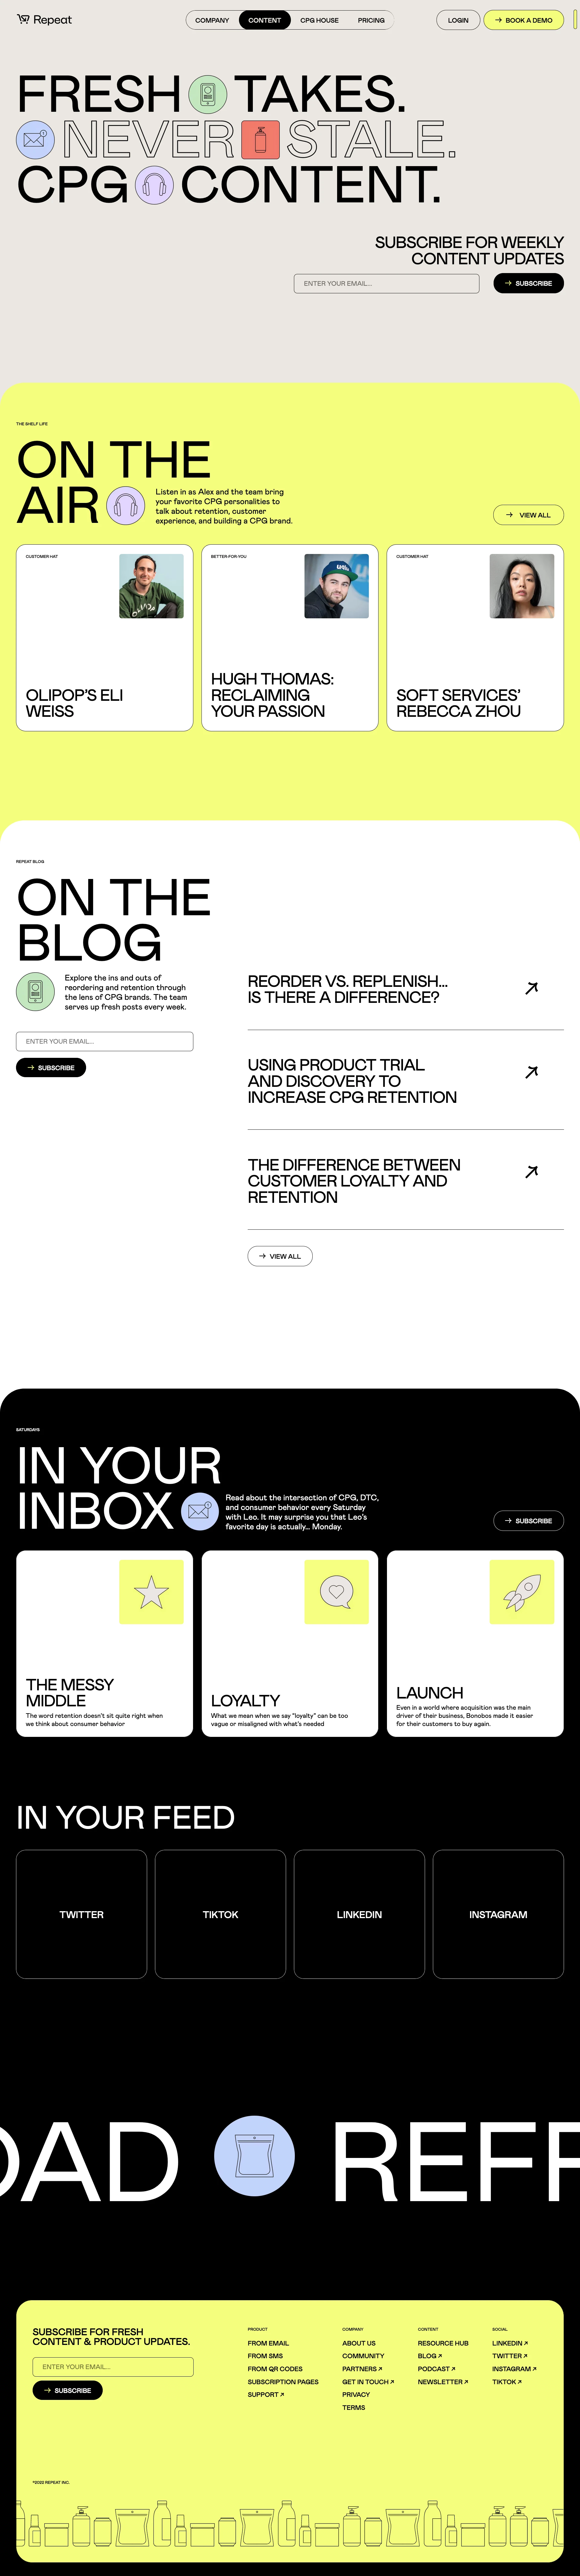 Repeat Landing Page Example: CPG brands use Repeat to give returning customers an easy reordering experience. One that is faster, personalized and backed by insight. Get more revenue from your repeat customers.